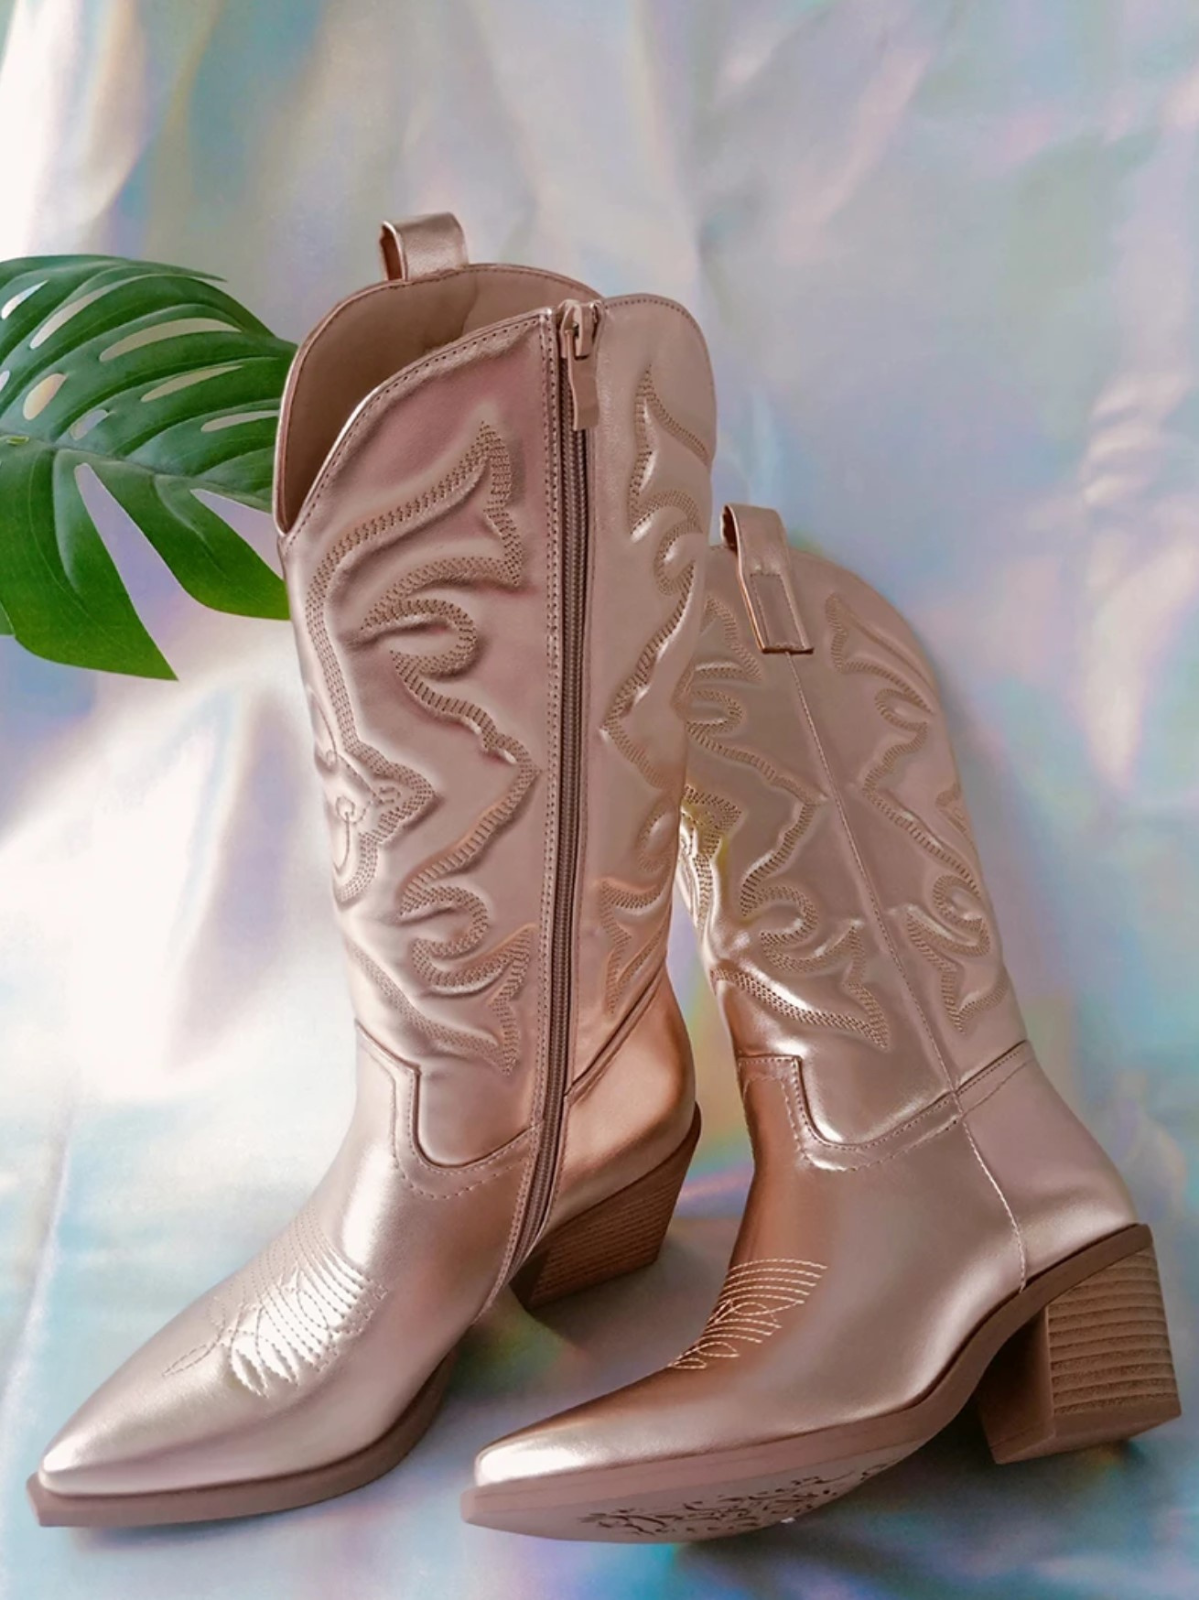 Mia Belle Girls Country Sparkle Metallic Cowgirl Boots | Women's Shoes